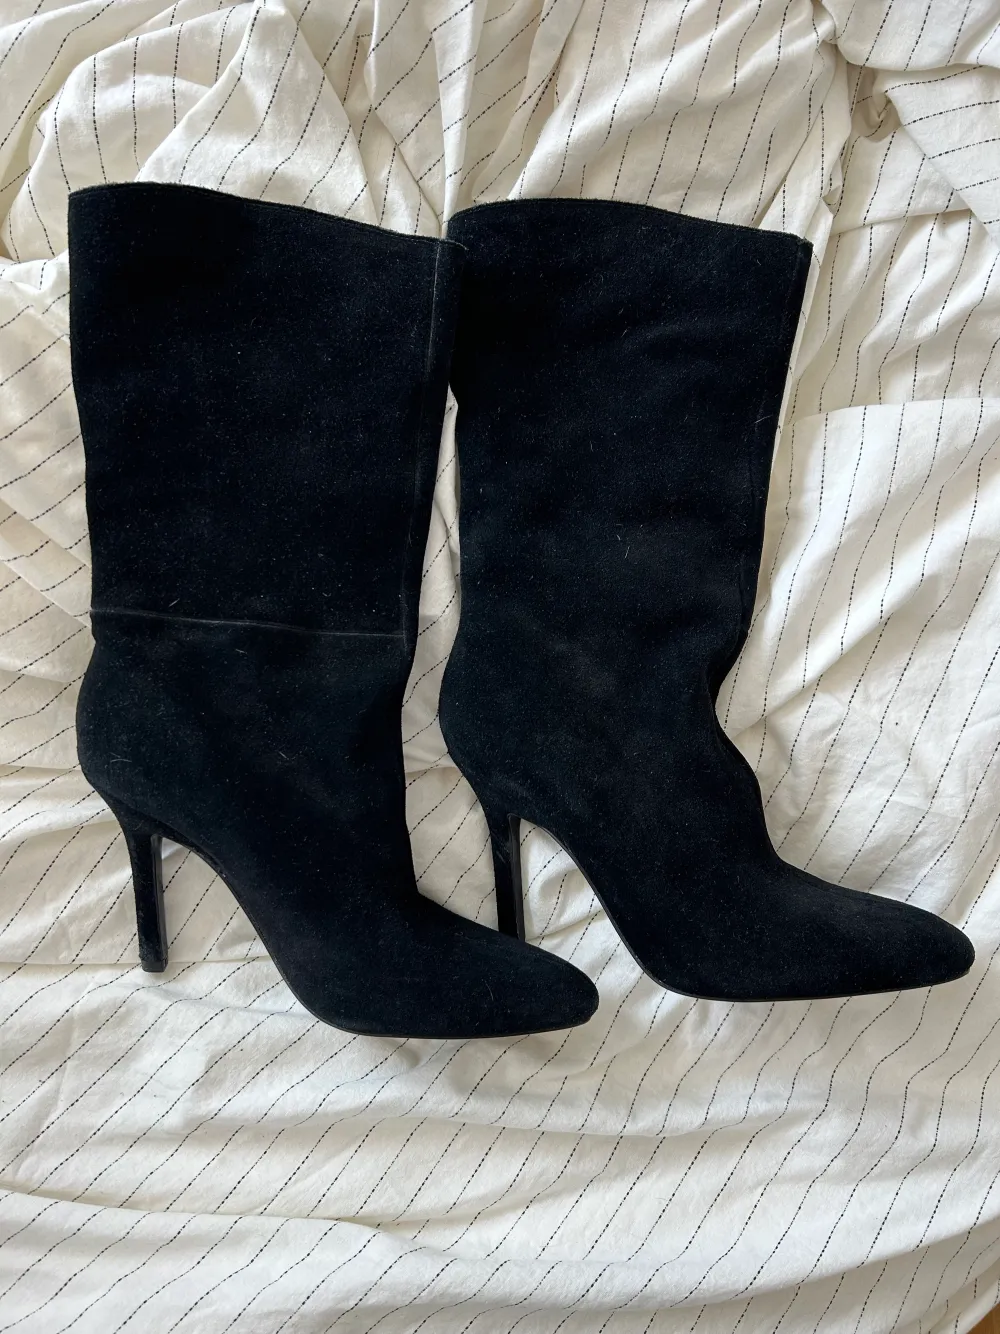 Suede pump boots. Reaches to your mid calf. Really classy and elegant. Perfect corporate wear for fall. . Skor.